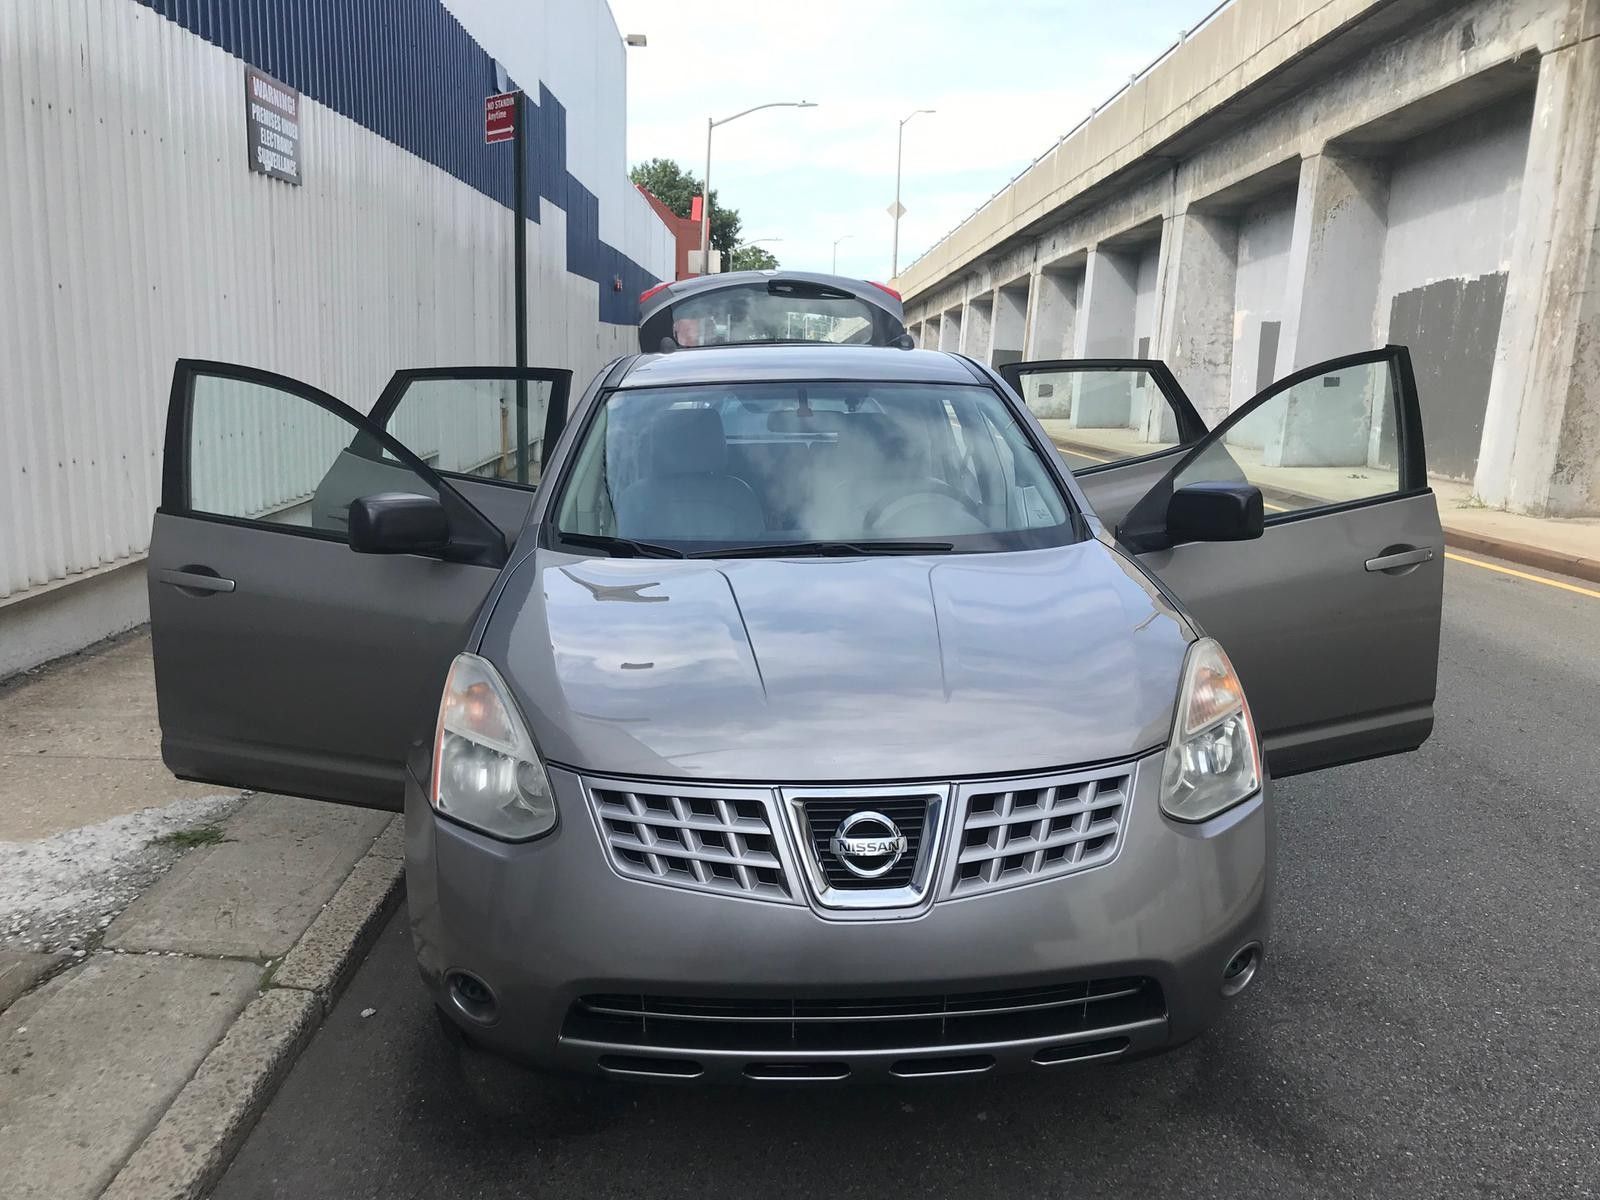 2008 NISSAN ROGUE S LEATHER SEATS PERFECT CONDITION